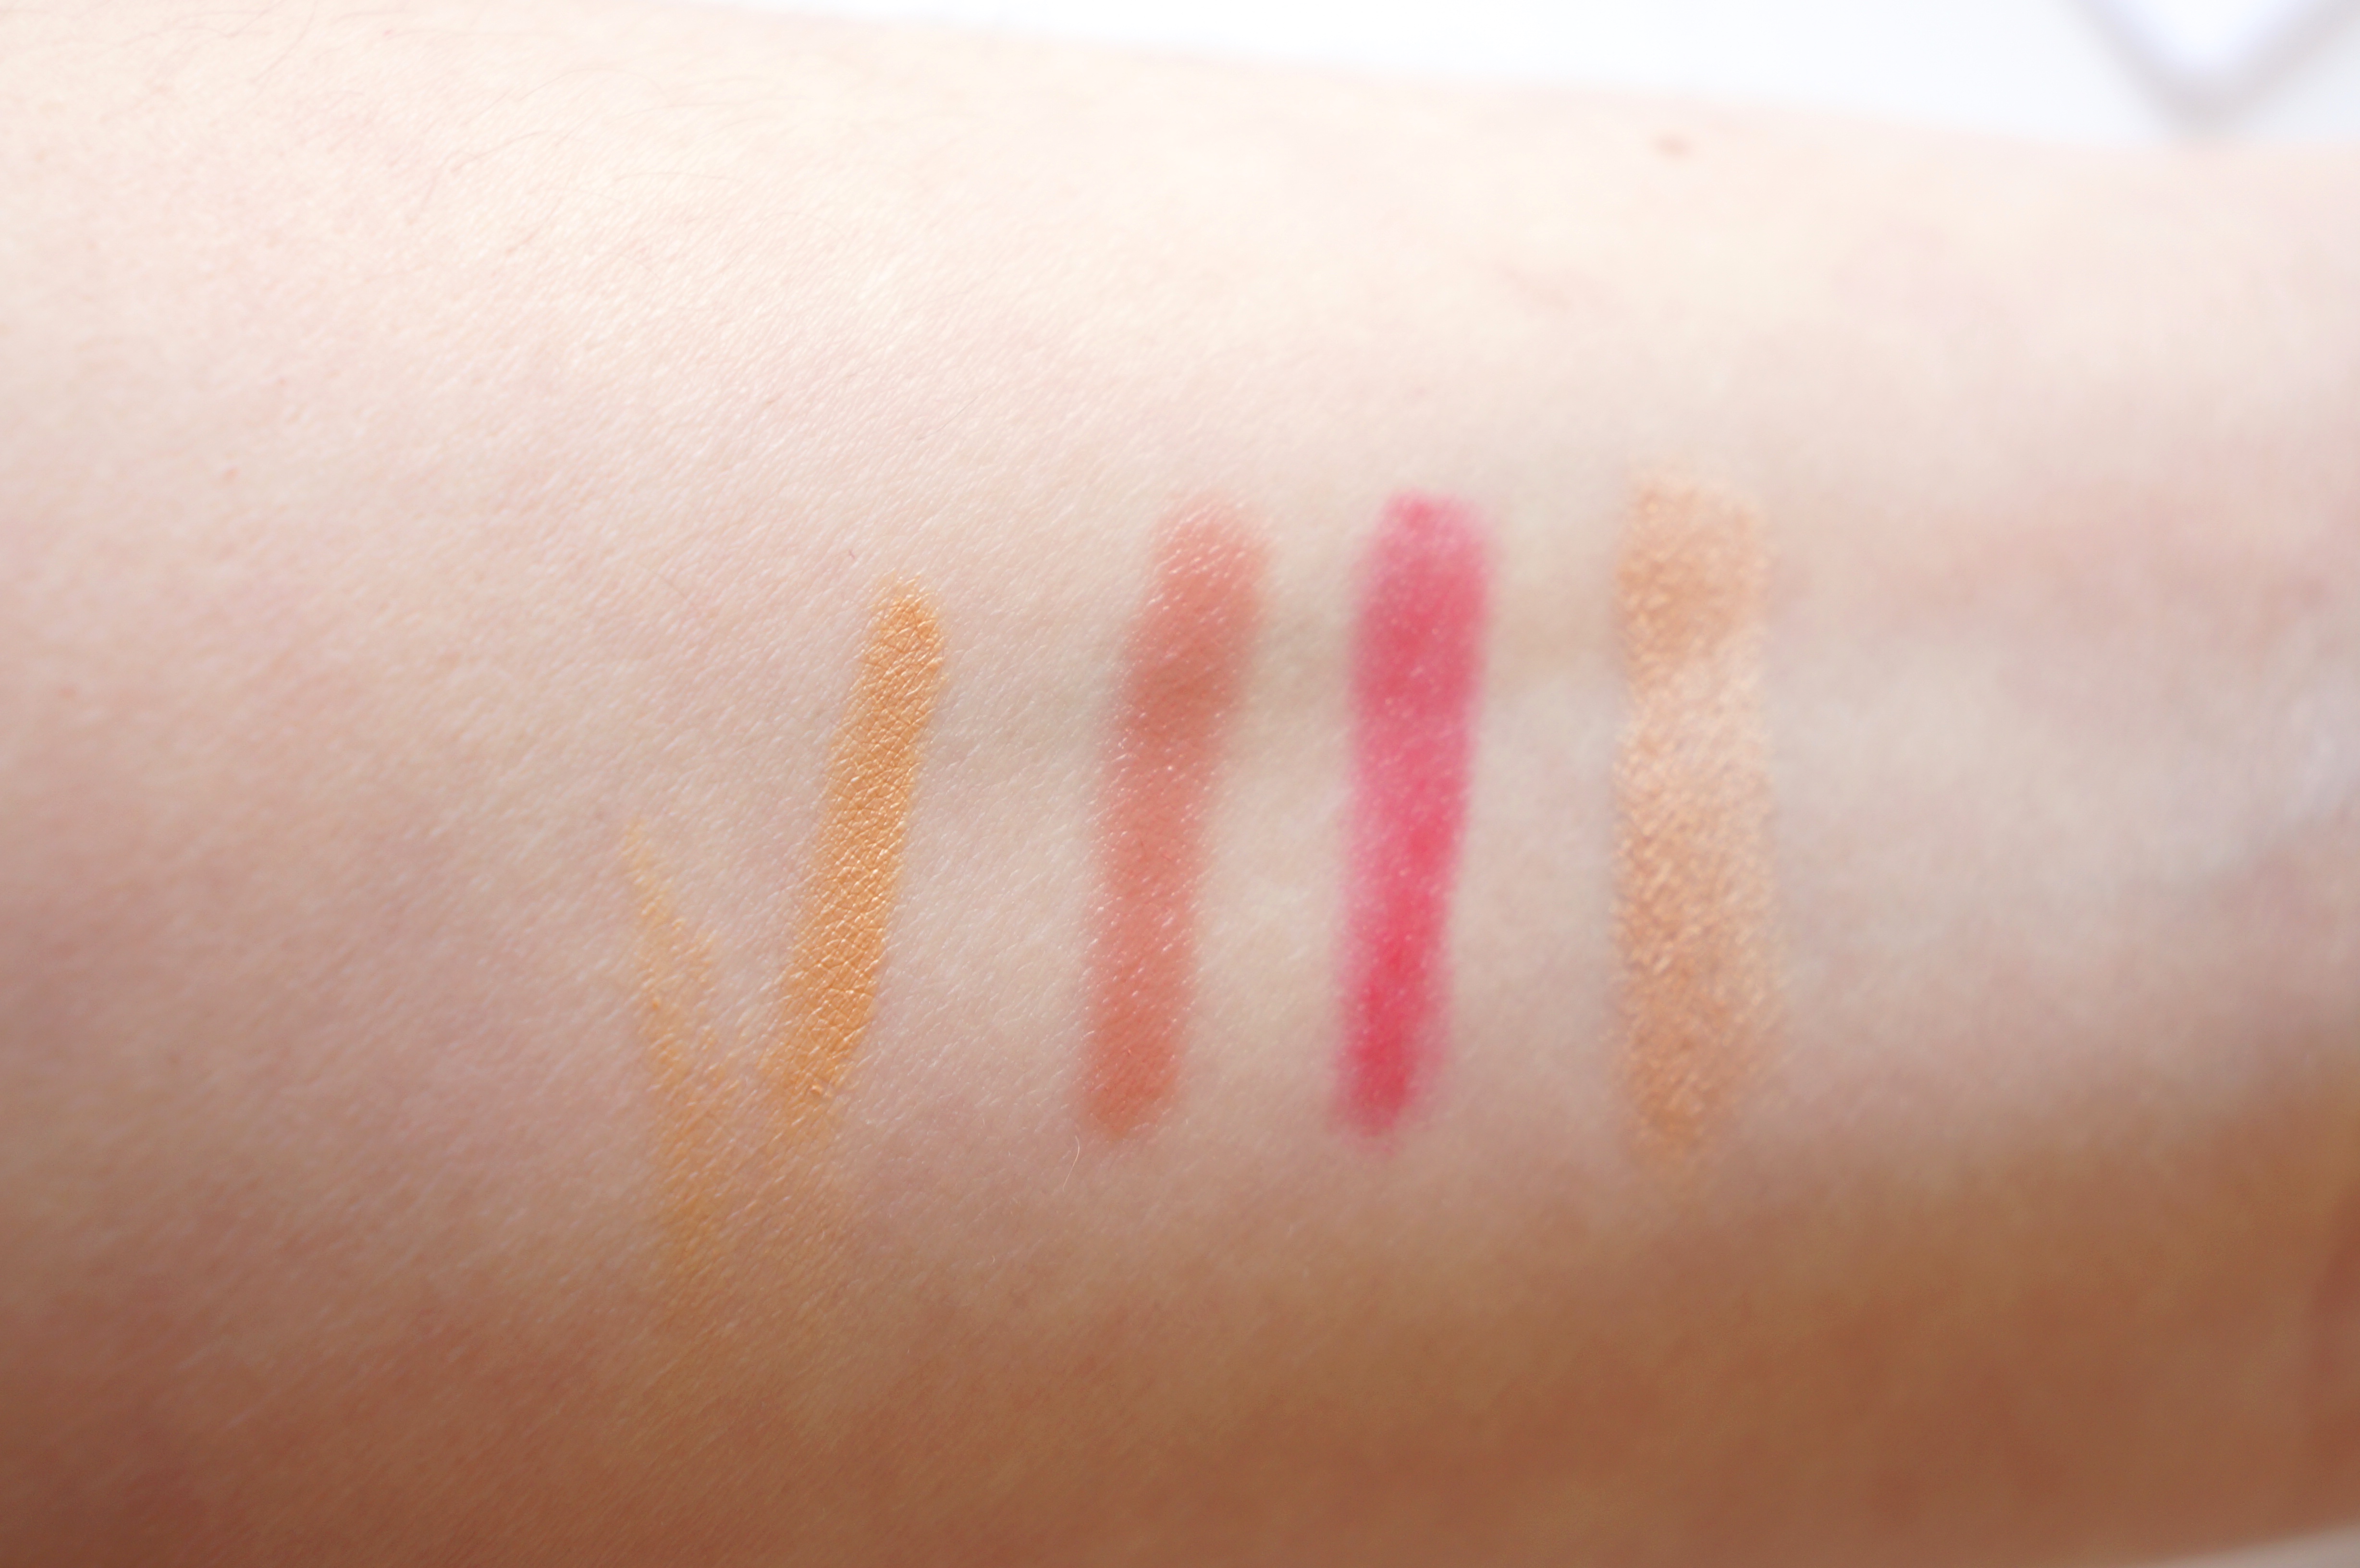 Left to right: Phyto-Concealer in shade 4, Phyto-Lip Twist in Litchi and Poppy and Phyto-Eye Twist in Pearl by Sisley/ Pic by 1FDLE.